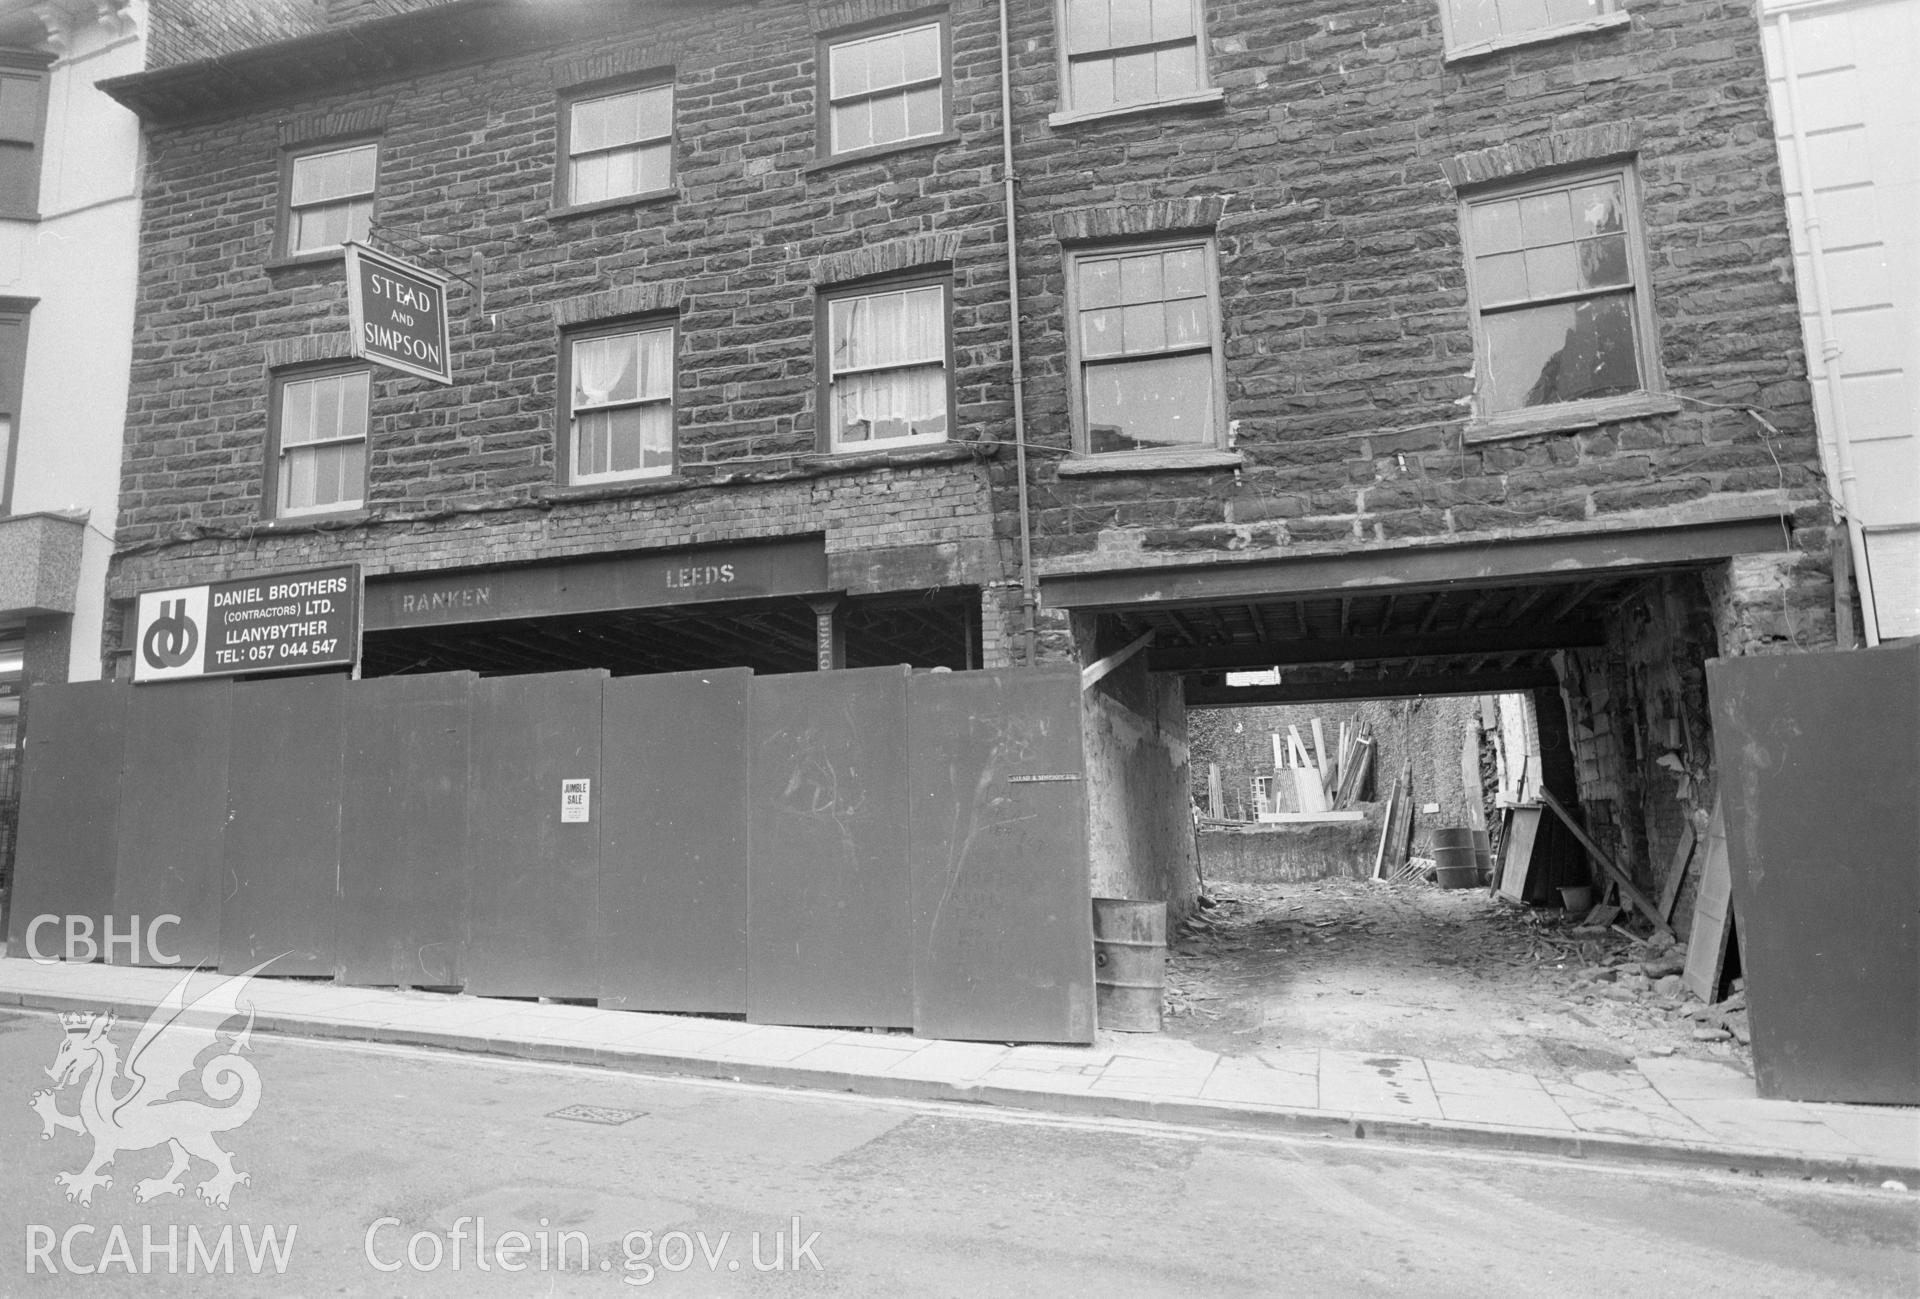 Digital copy of a black and white negative showing exterior front view of the old Stead & Simpson Shop, Great Darkgate Street, Aberystwyth.